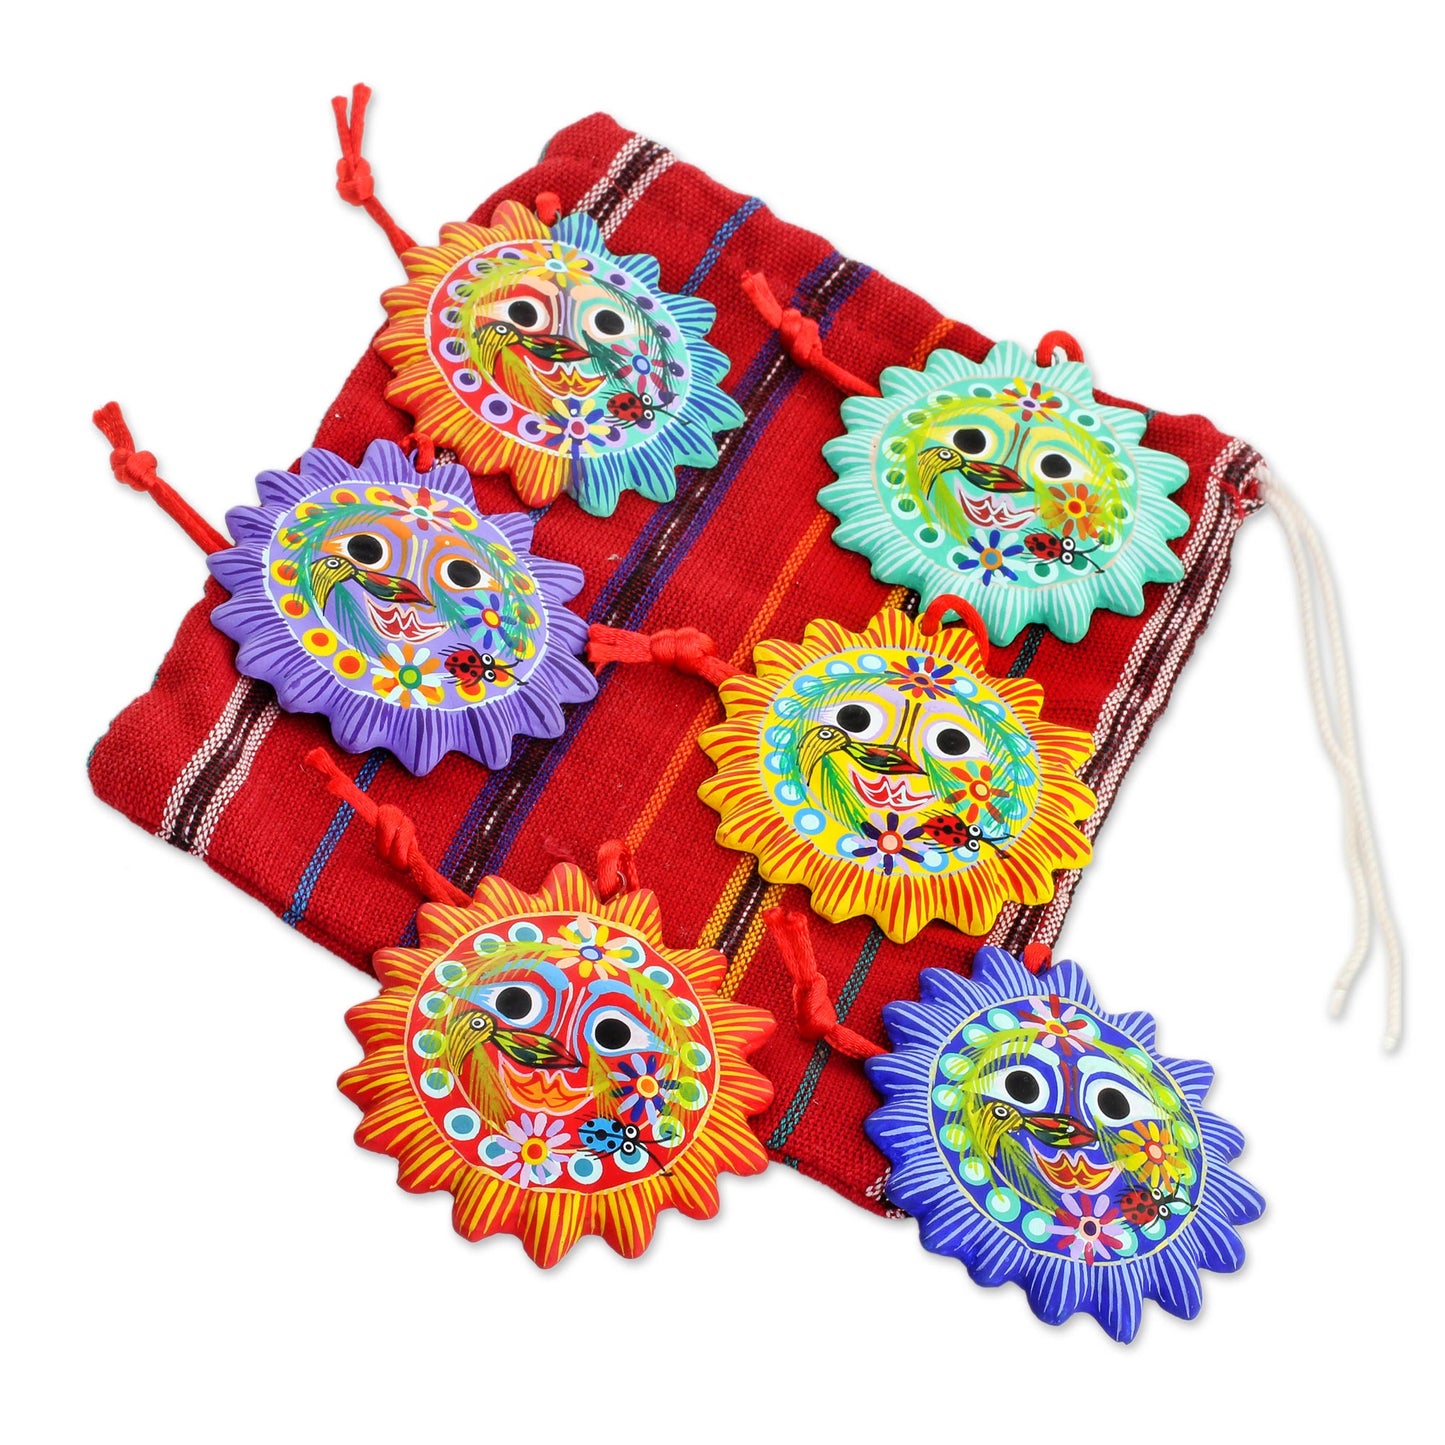 Lord of the Sun Ceramic Ornaments - Set of 6